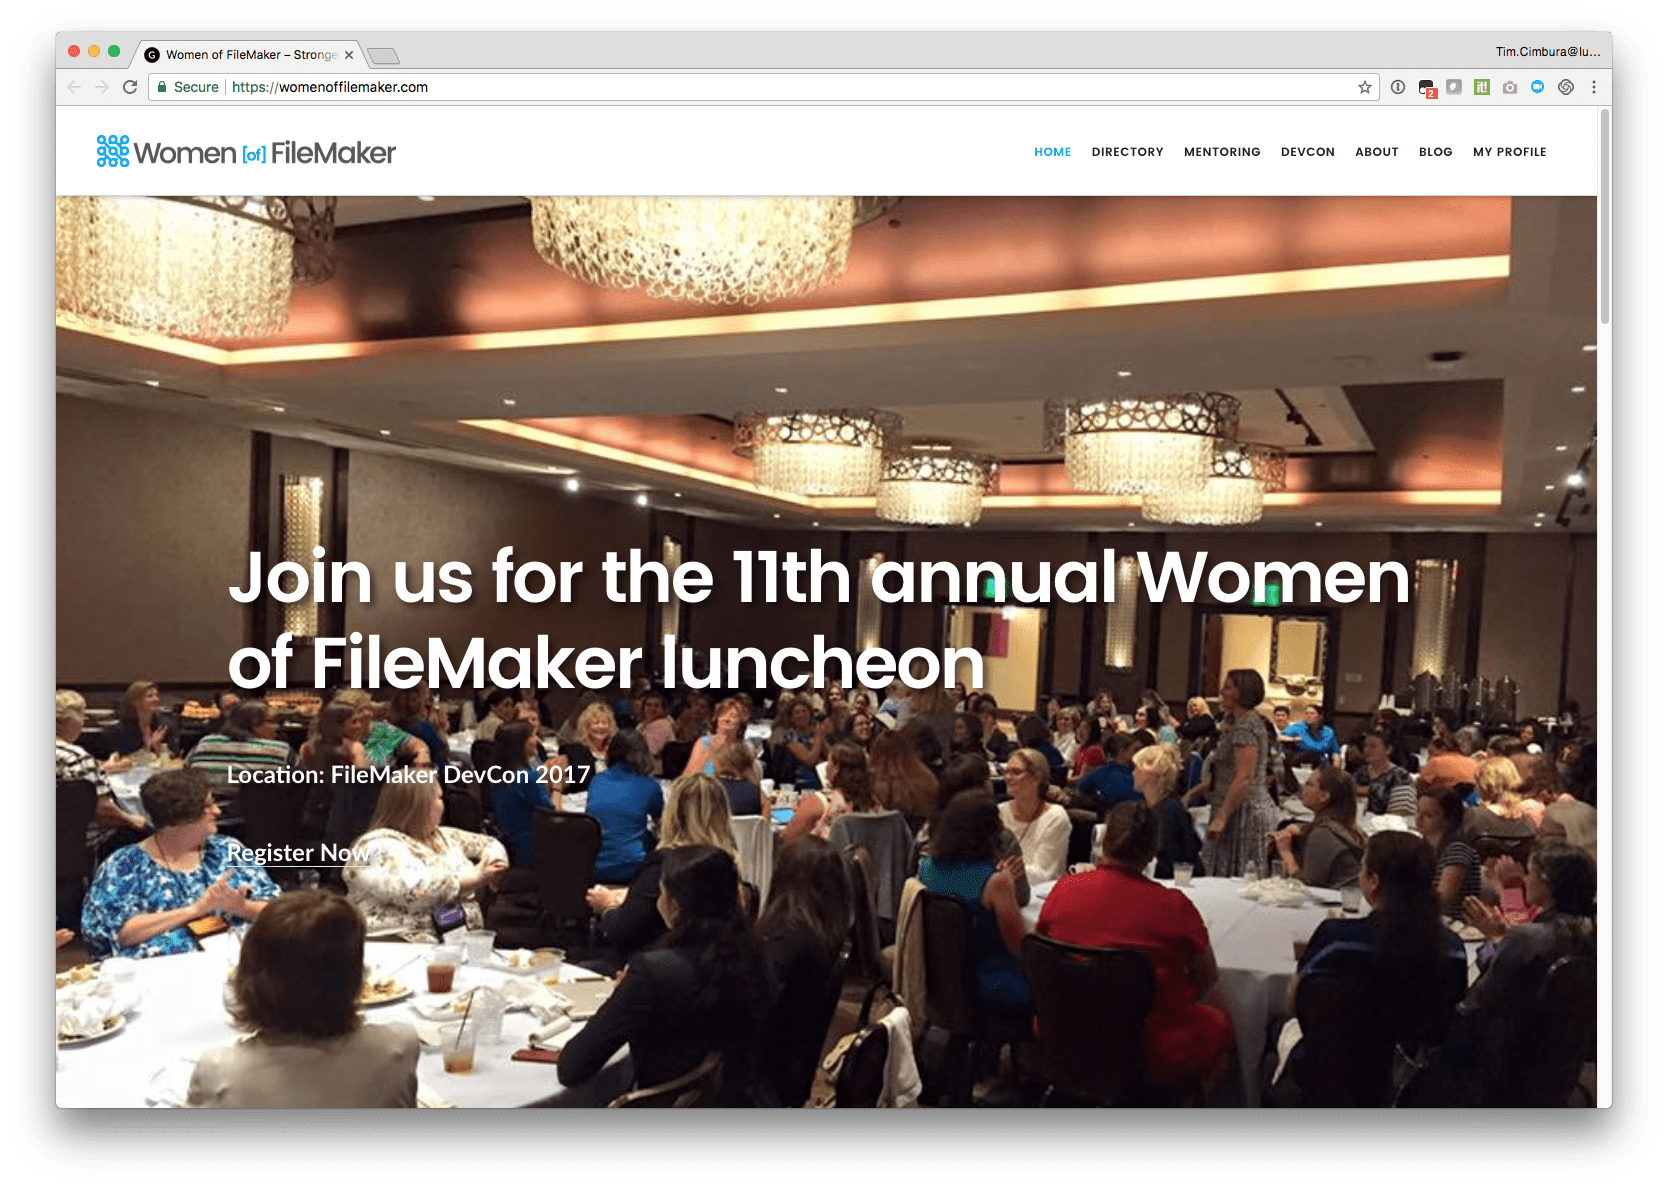 Women of FileMaker Luncheon at DevCon 2017